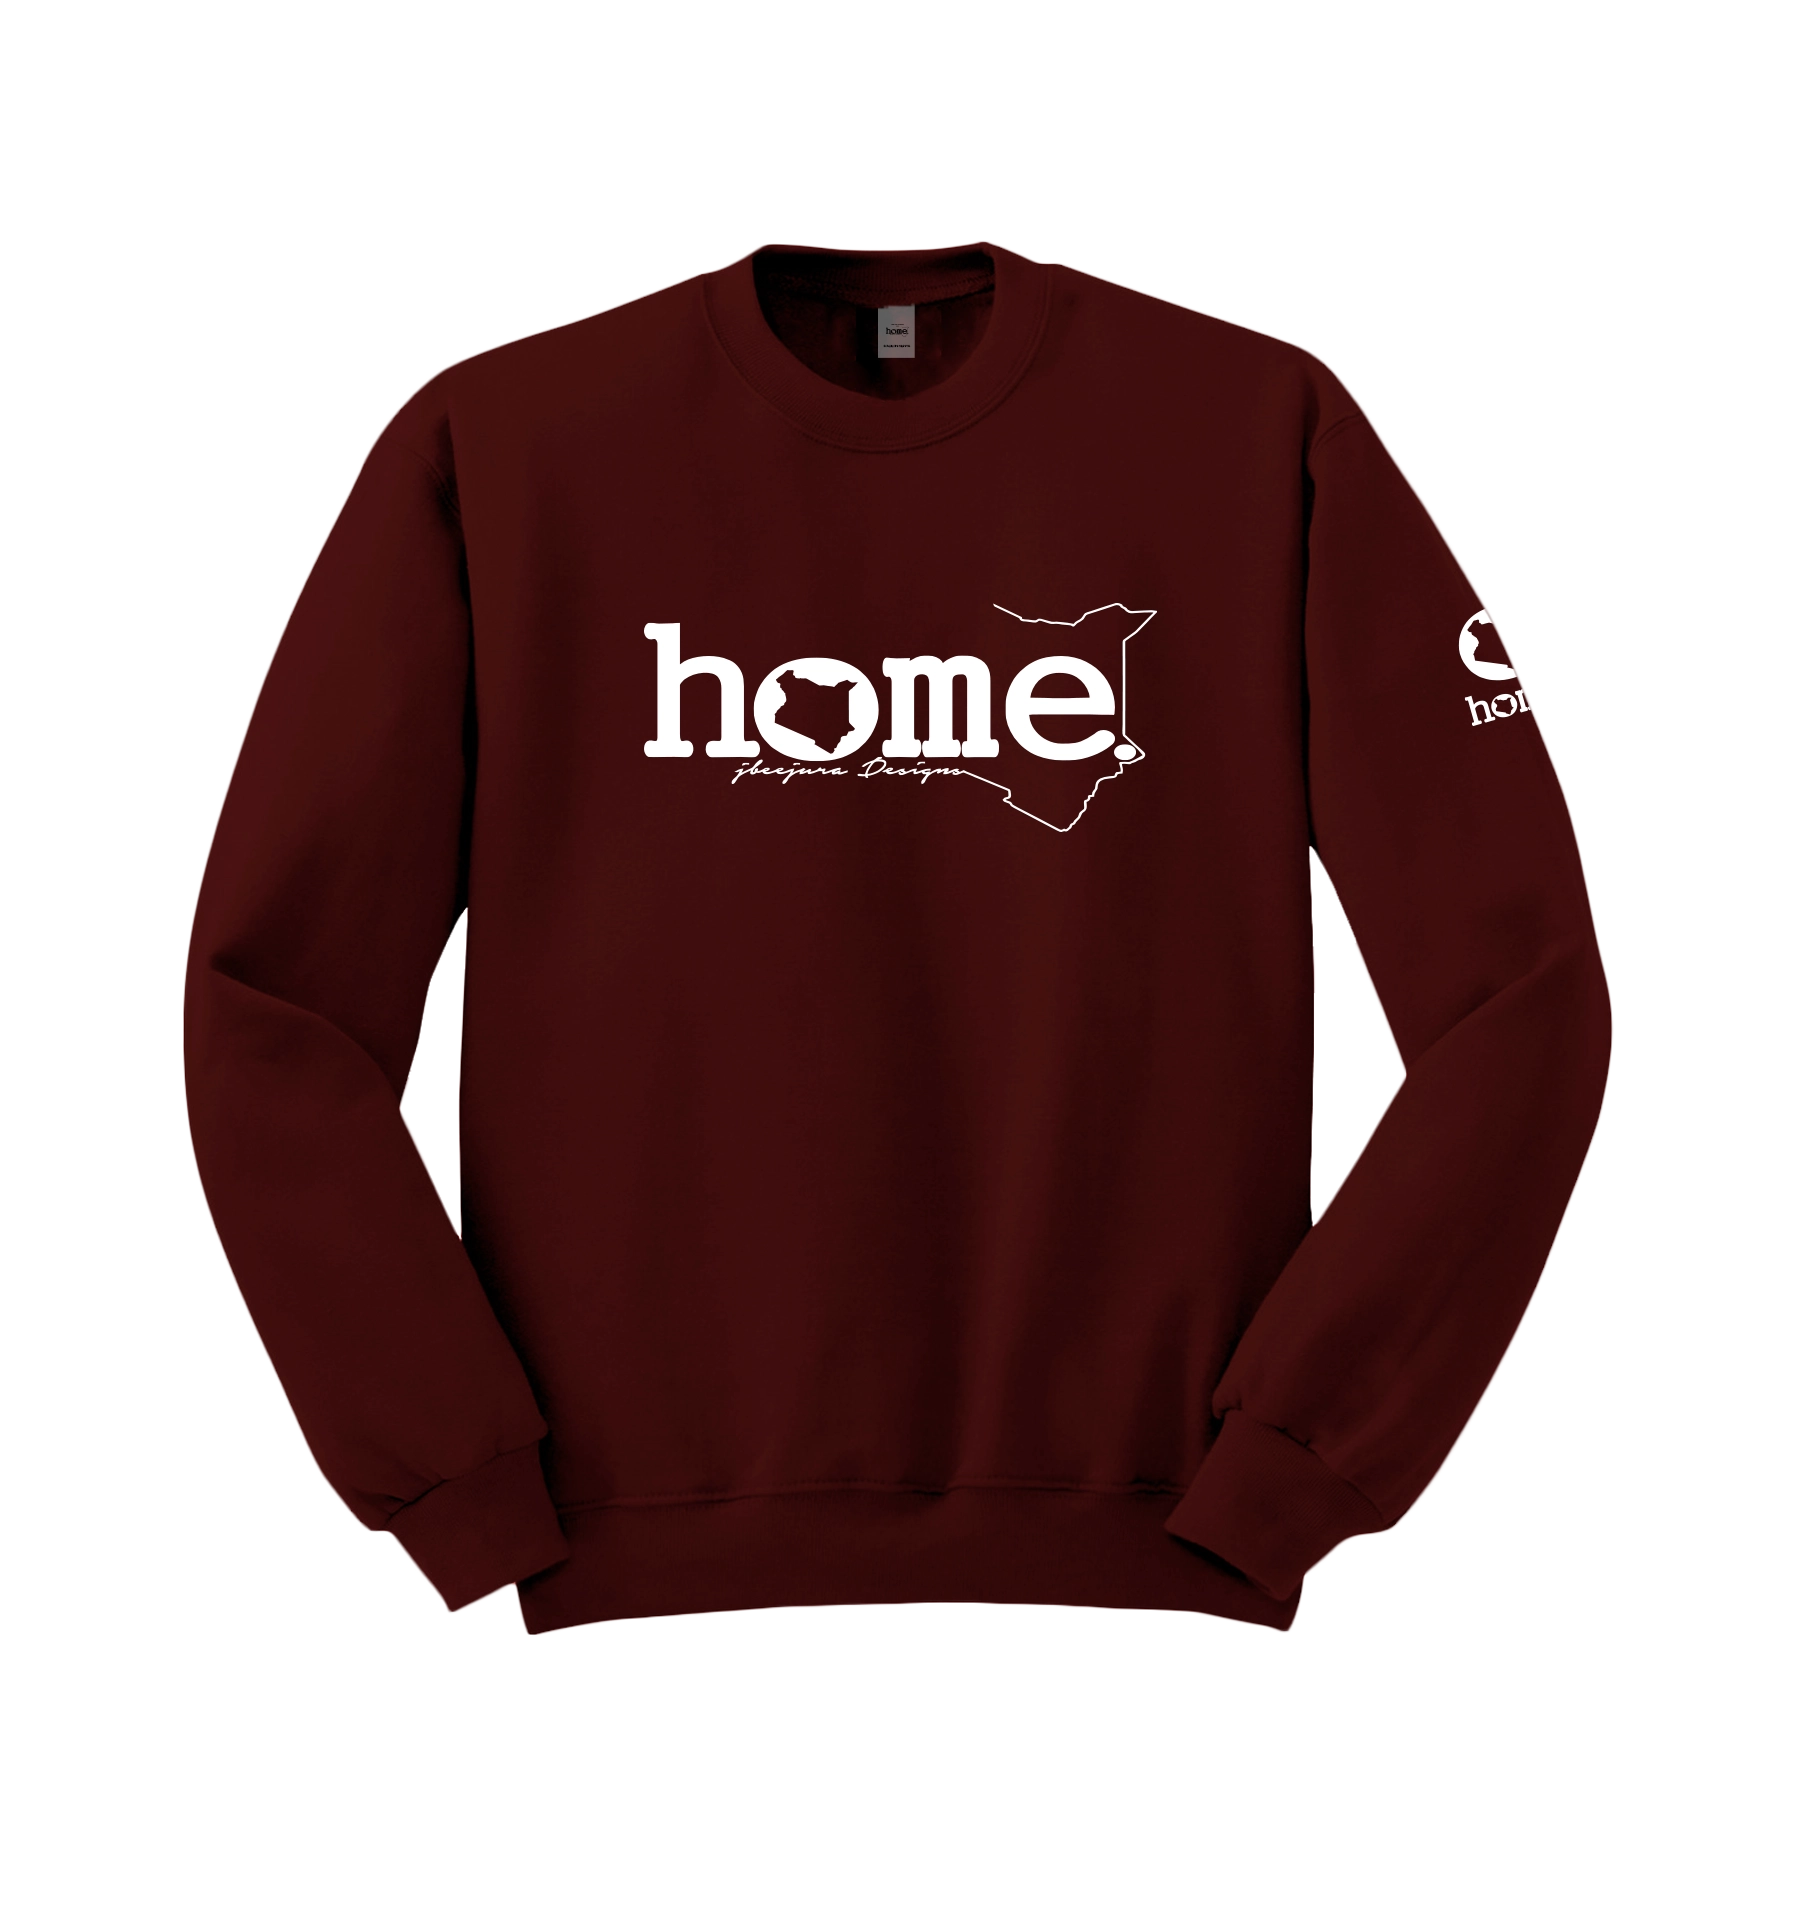 home_254 MAROON SWEATSHIRT (MID-HEAVY FABRIC) WITH A WHITE WORDS PRINT